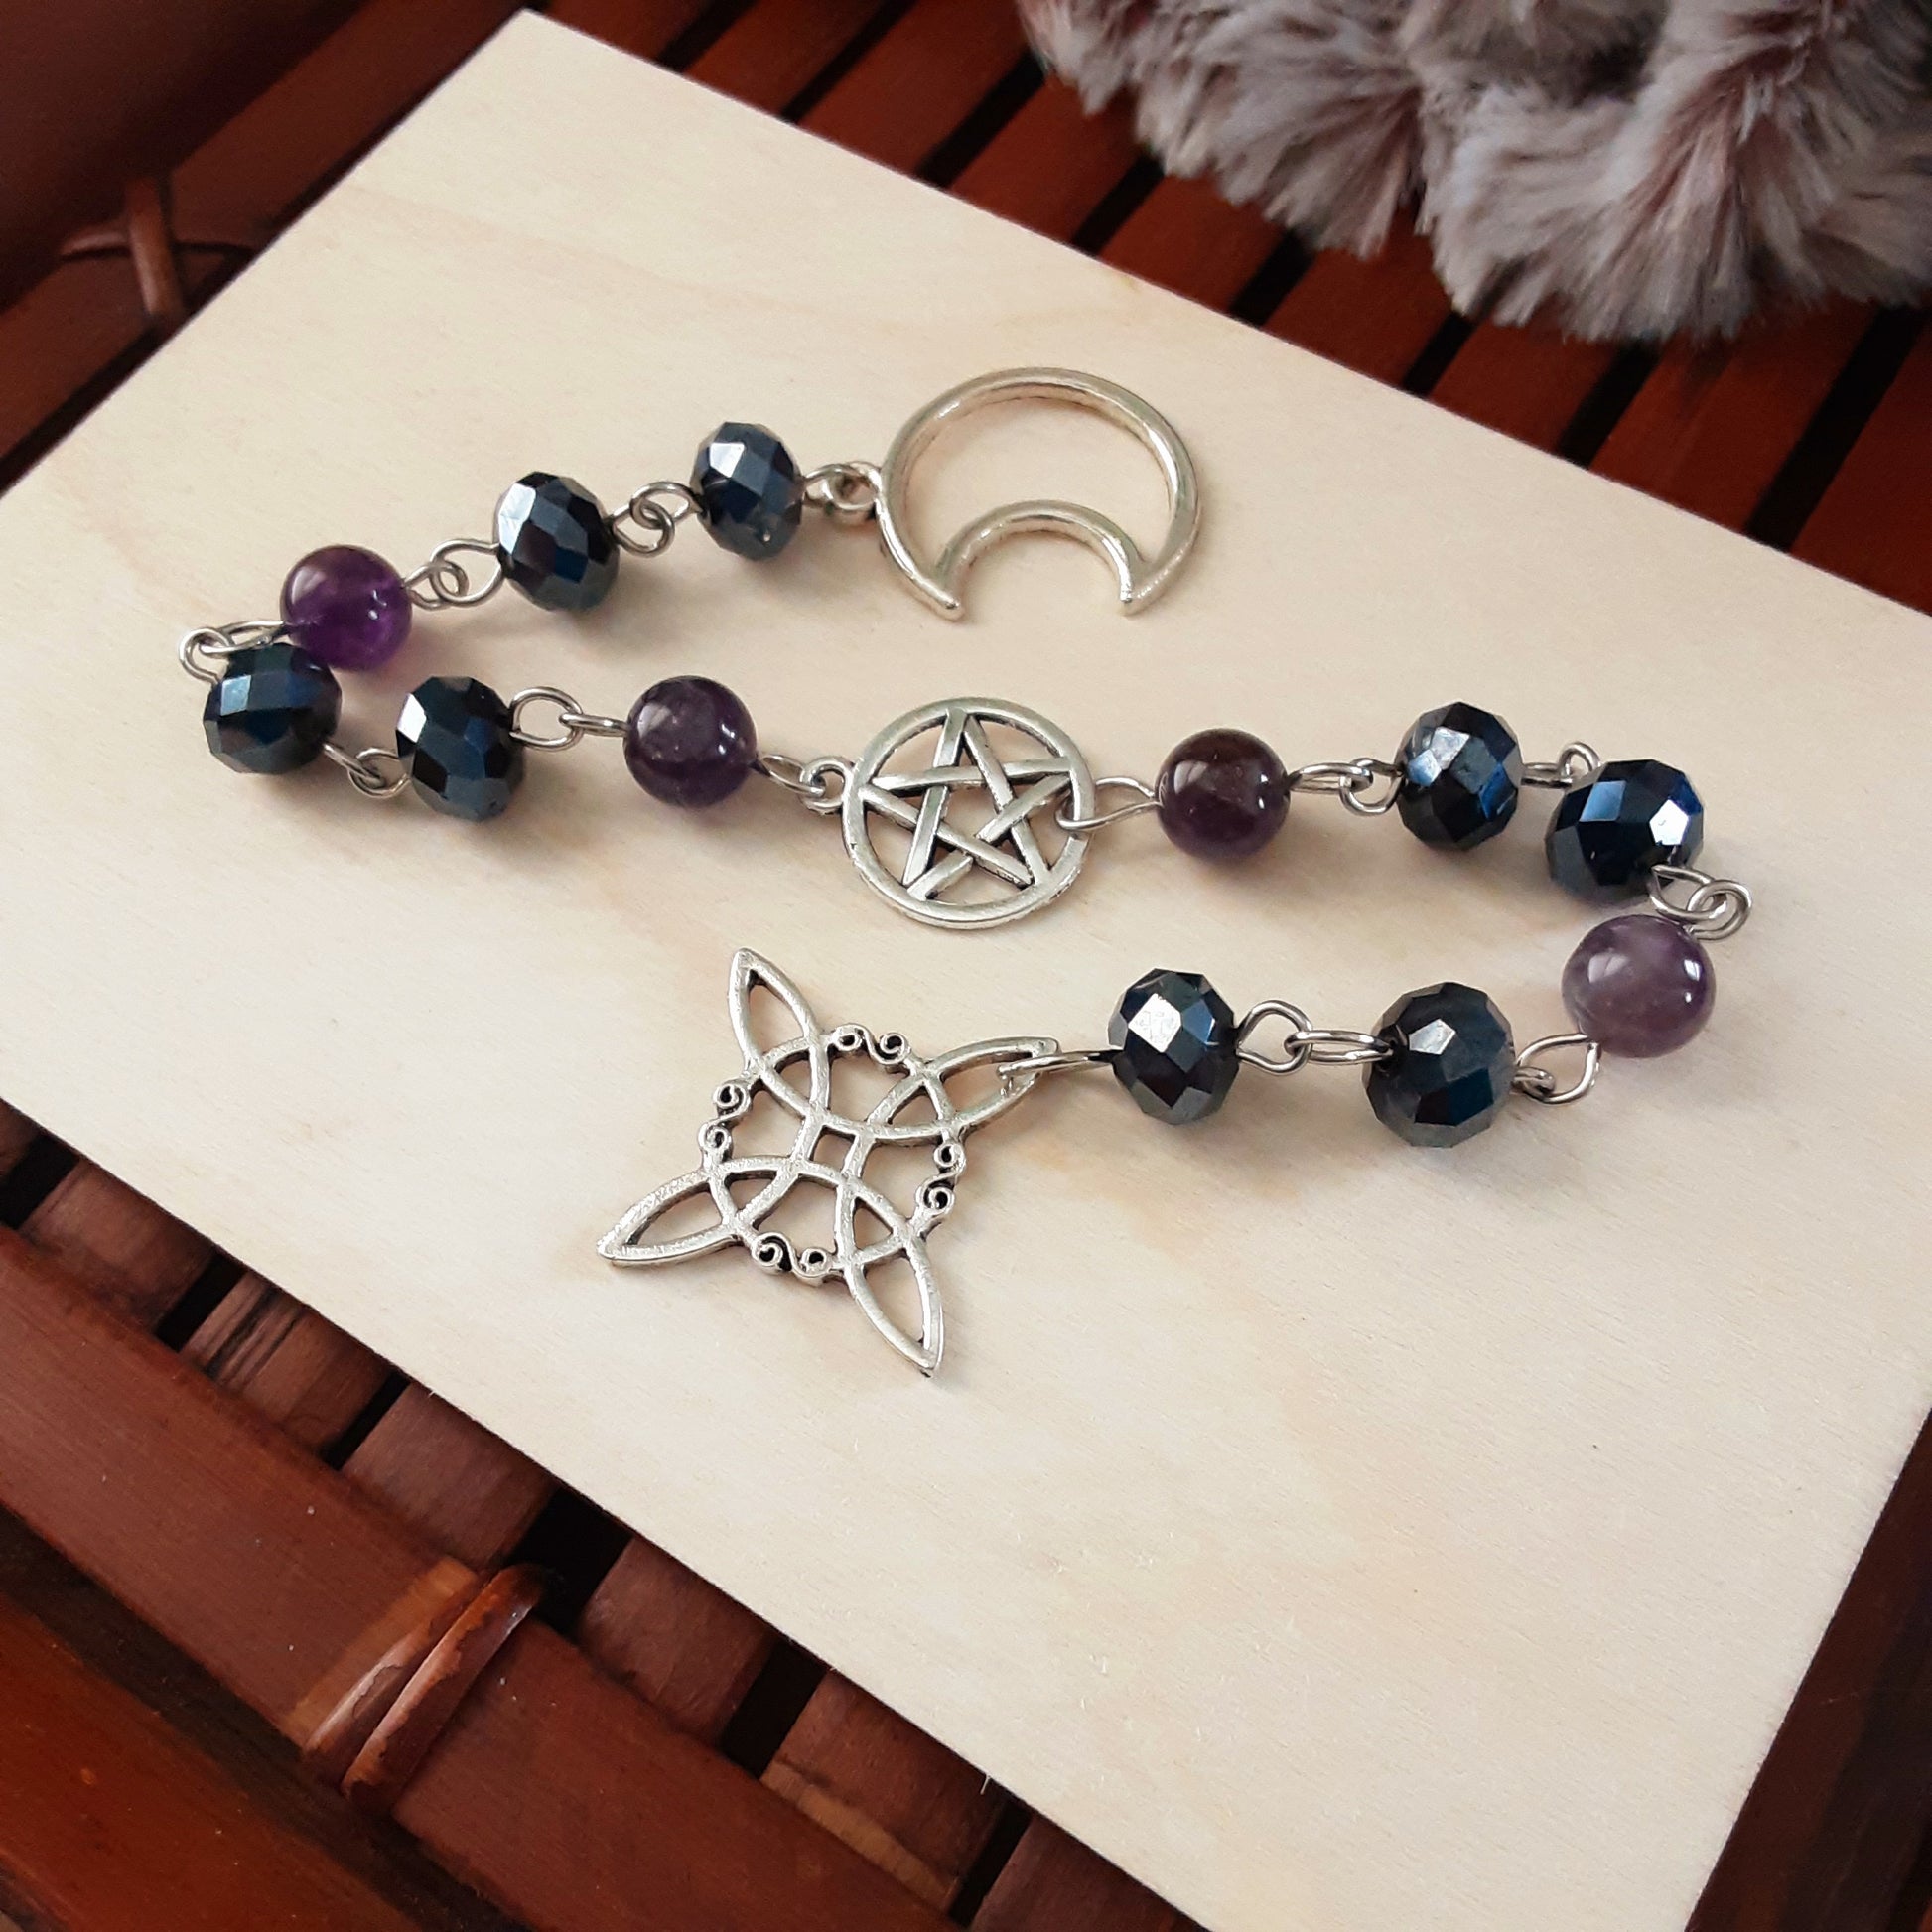 Witch knot prayer beads with Amethyst 7